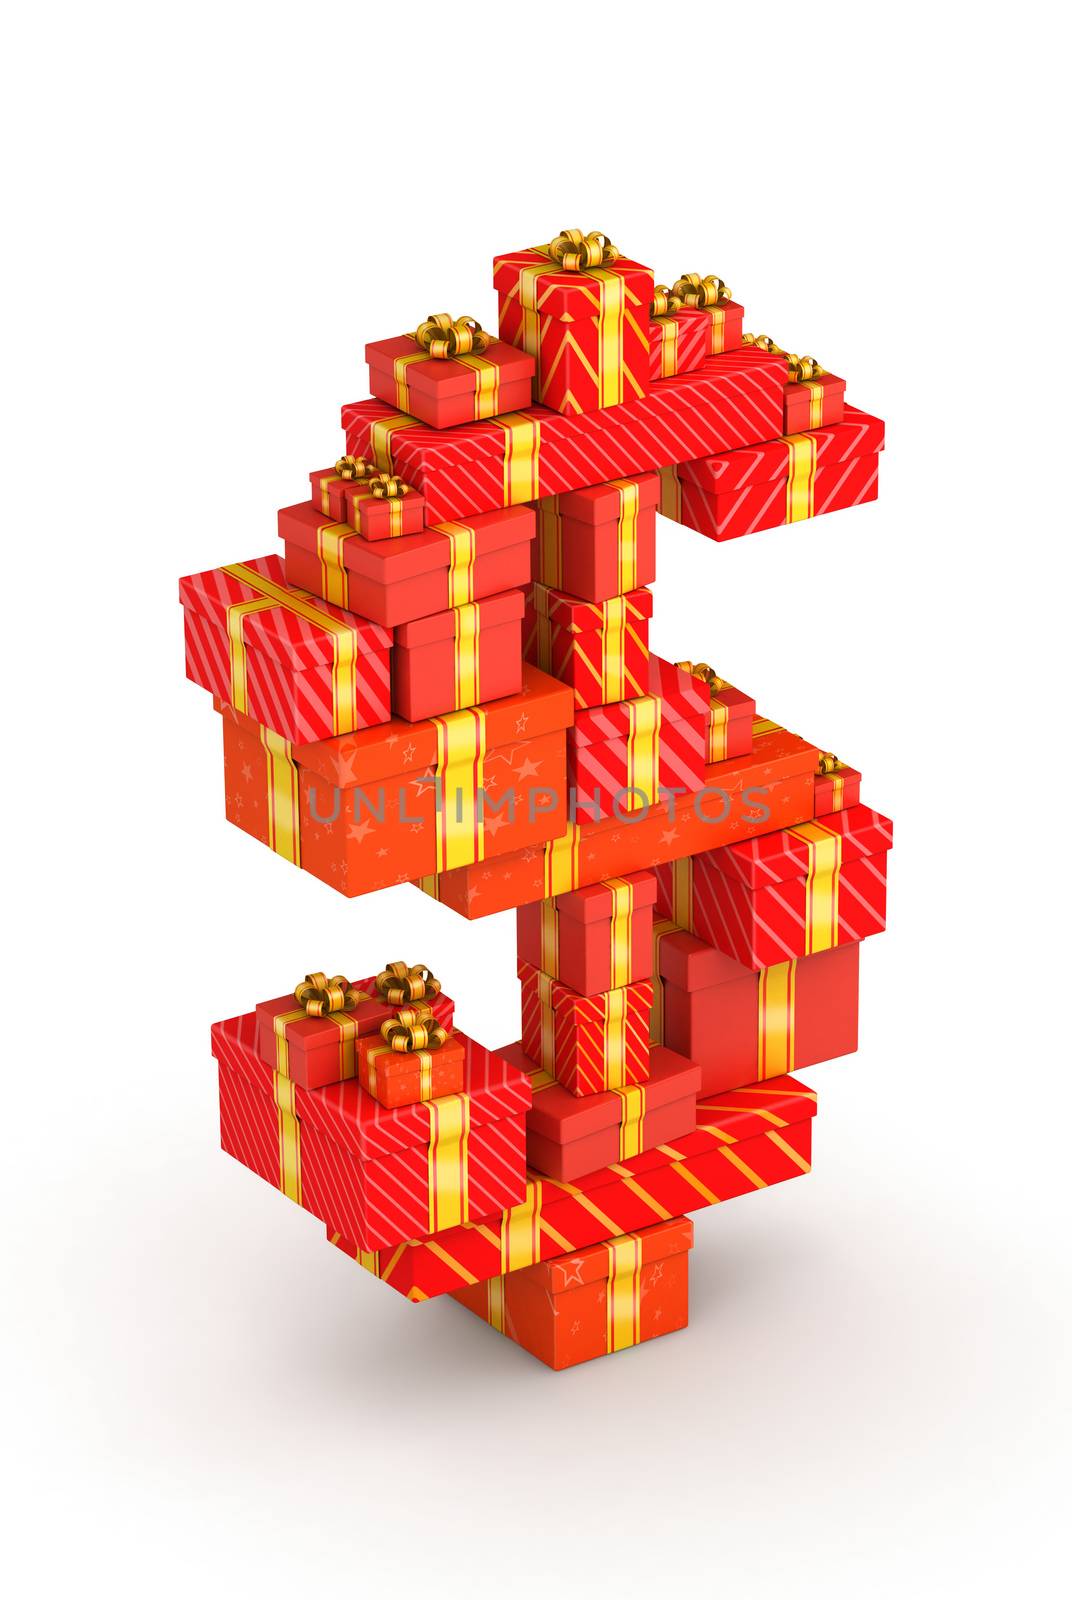 Dollar sign from gifts by iunewind